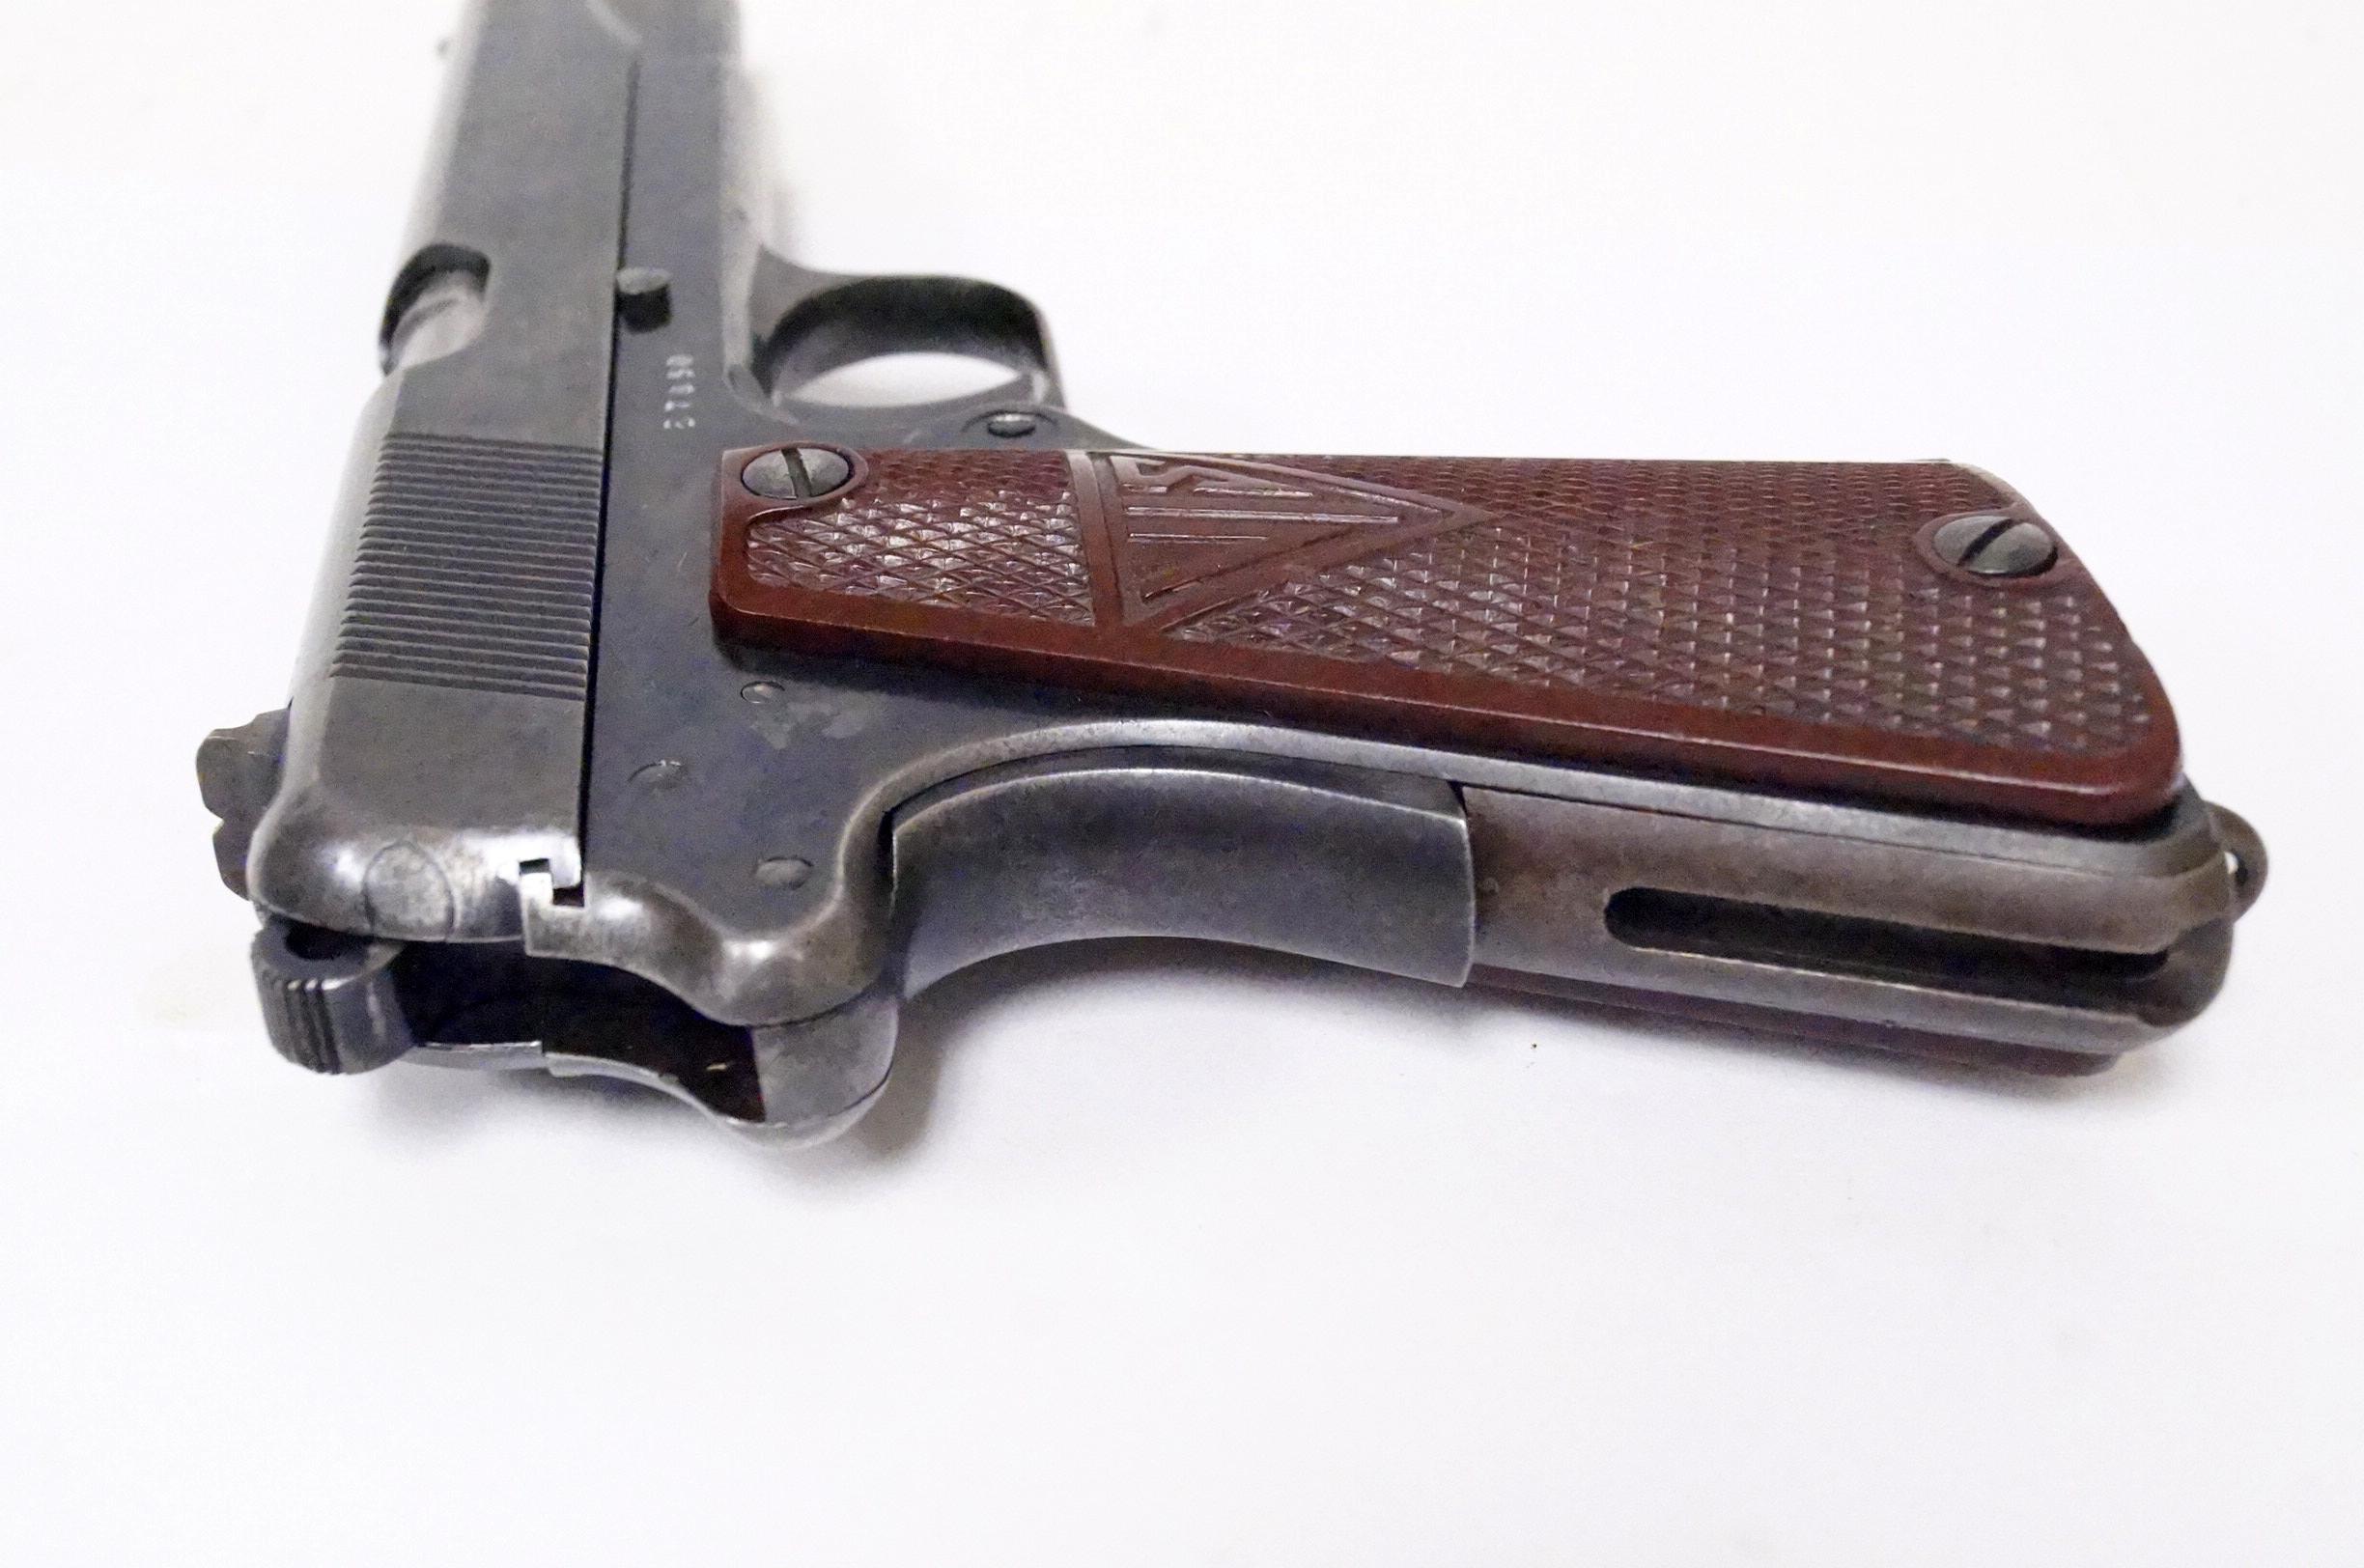 Rare Slotted 3-Lever Nazi VIS M1935 Radom P.35(p) 9mm Semi-Automatic Pistol with Holster